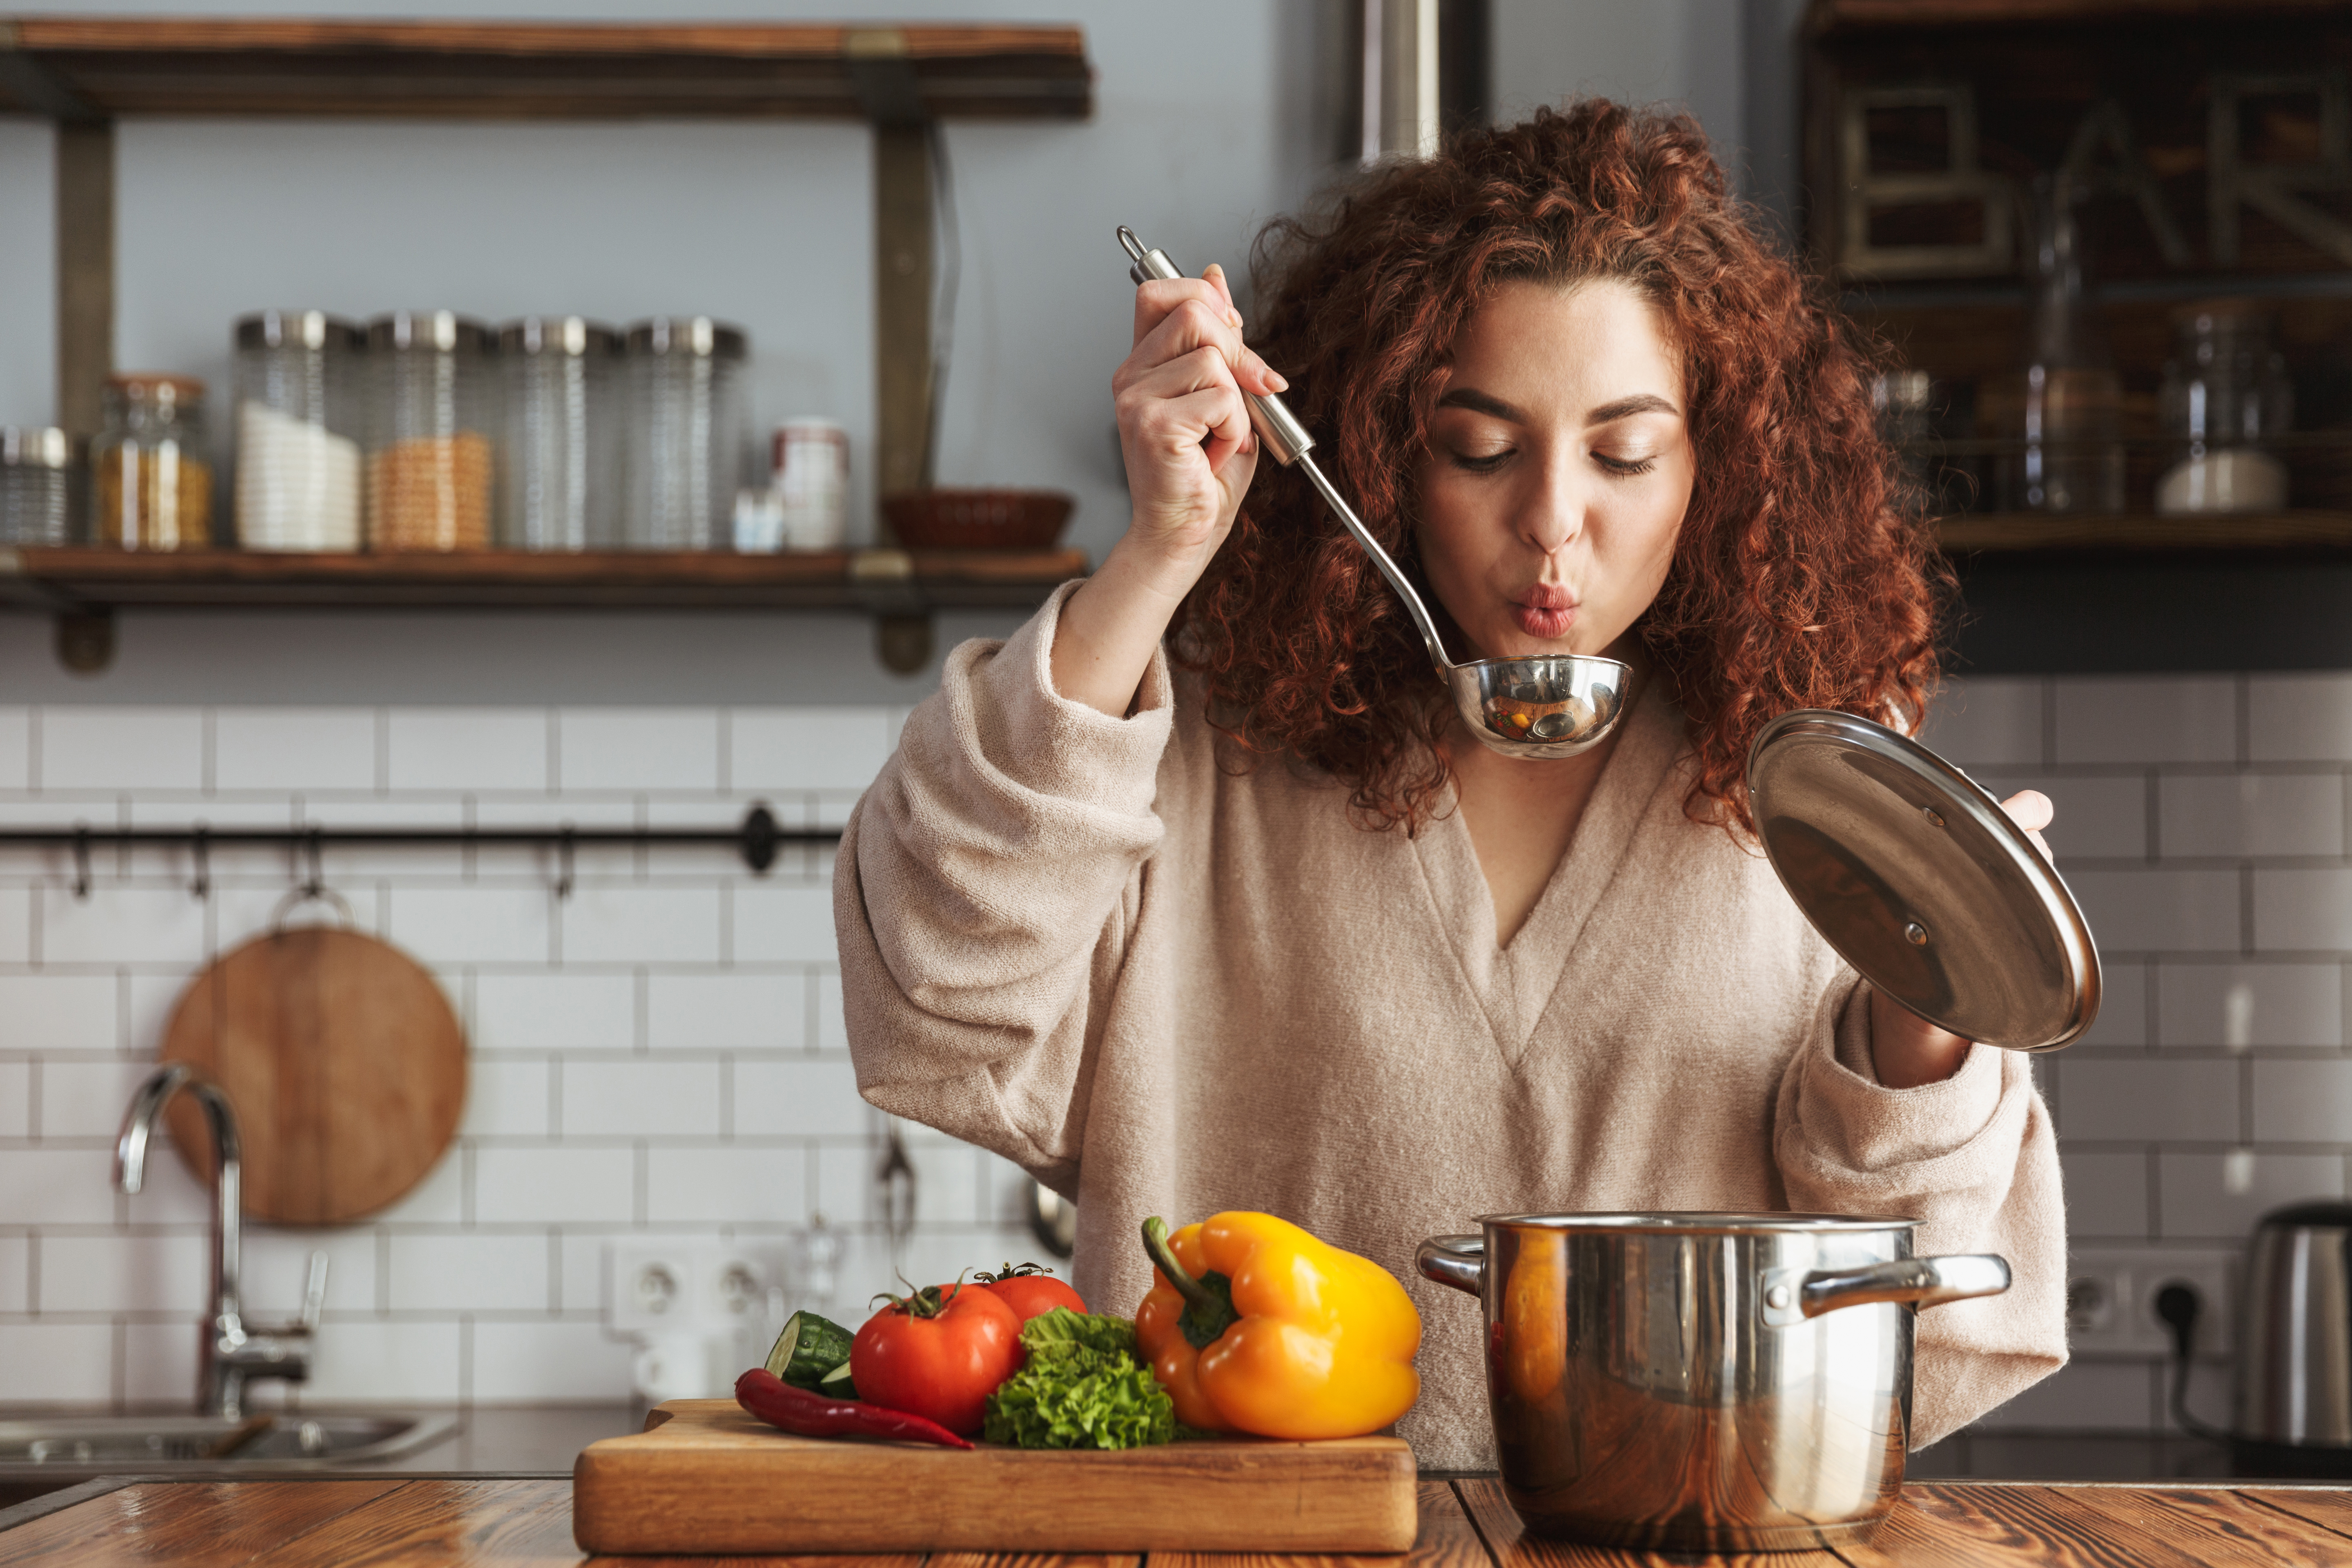 A woman tasting the food she has cooked | Source: Shutterstock